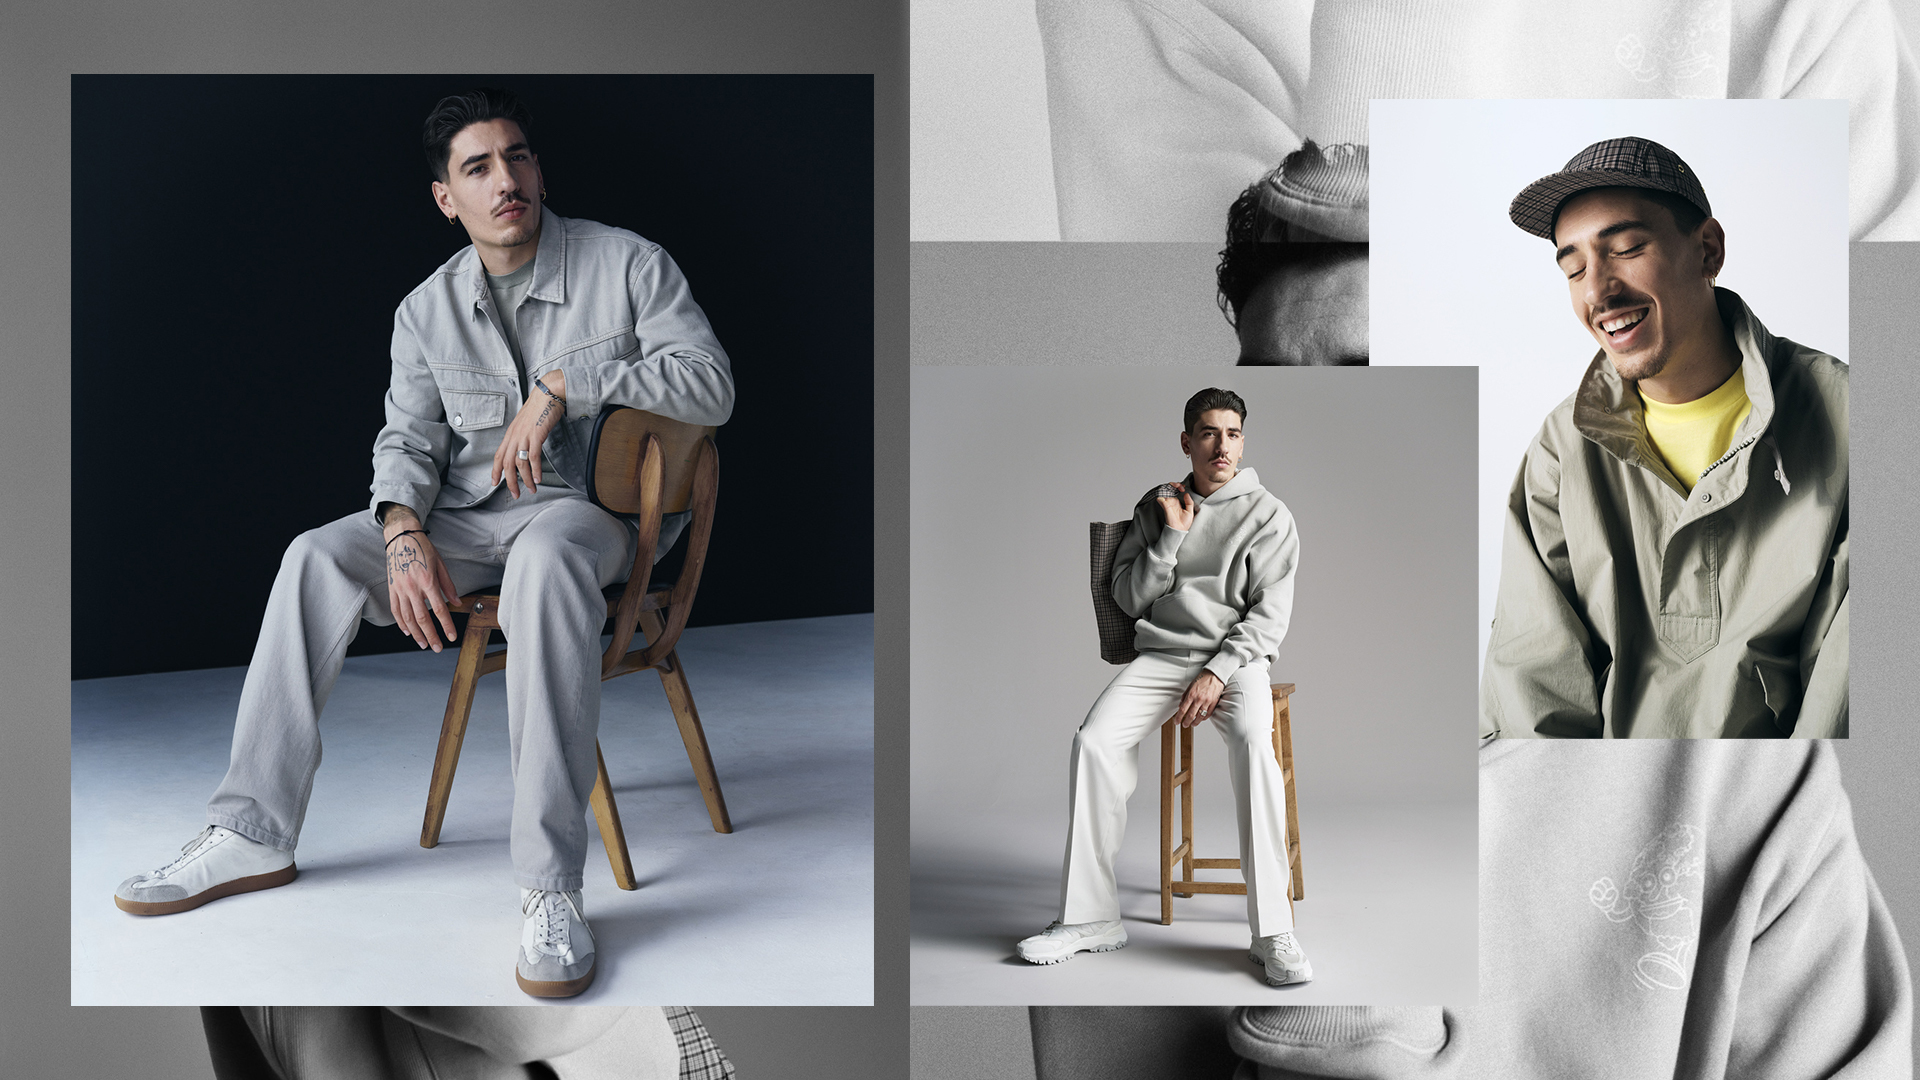 Hector Bellerin and H&M collaborate